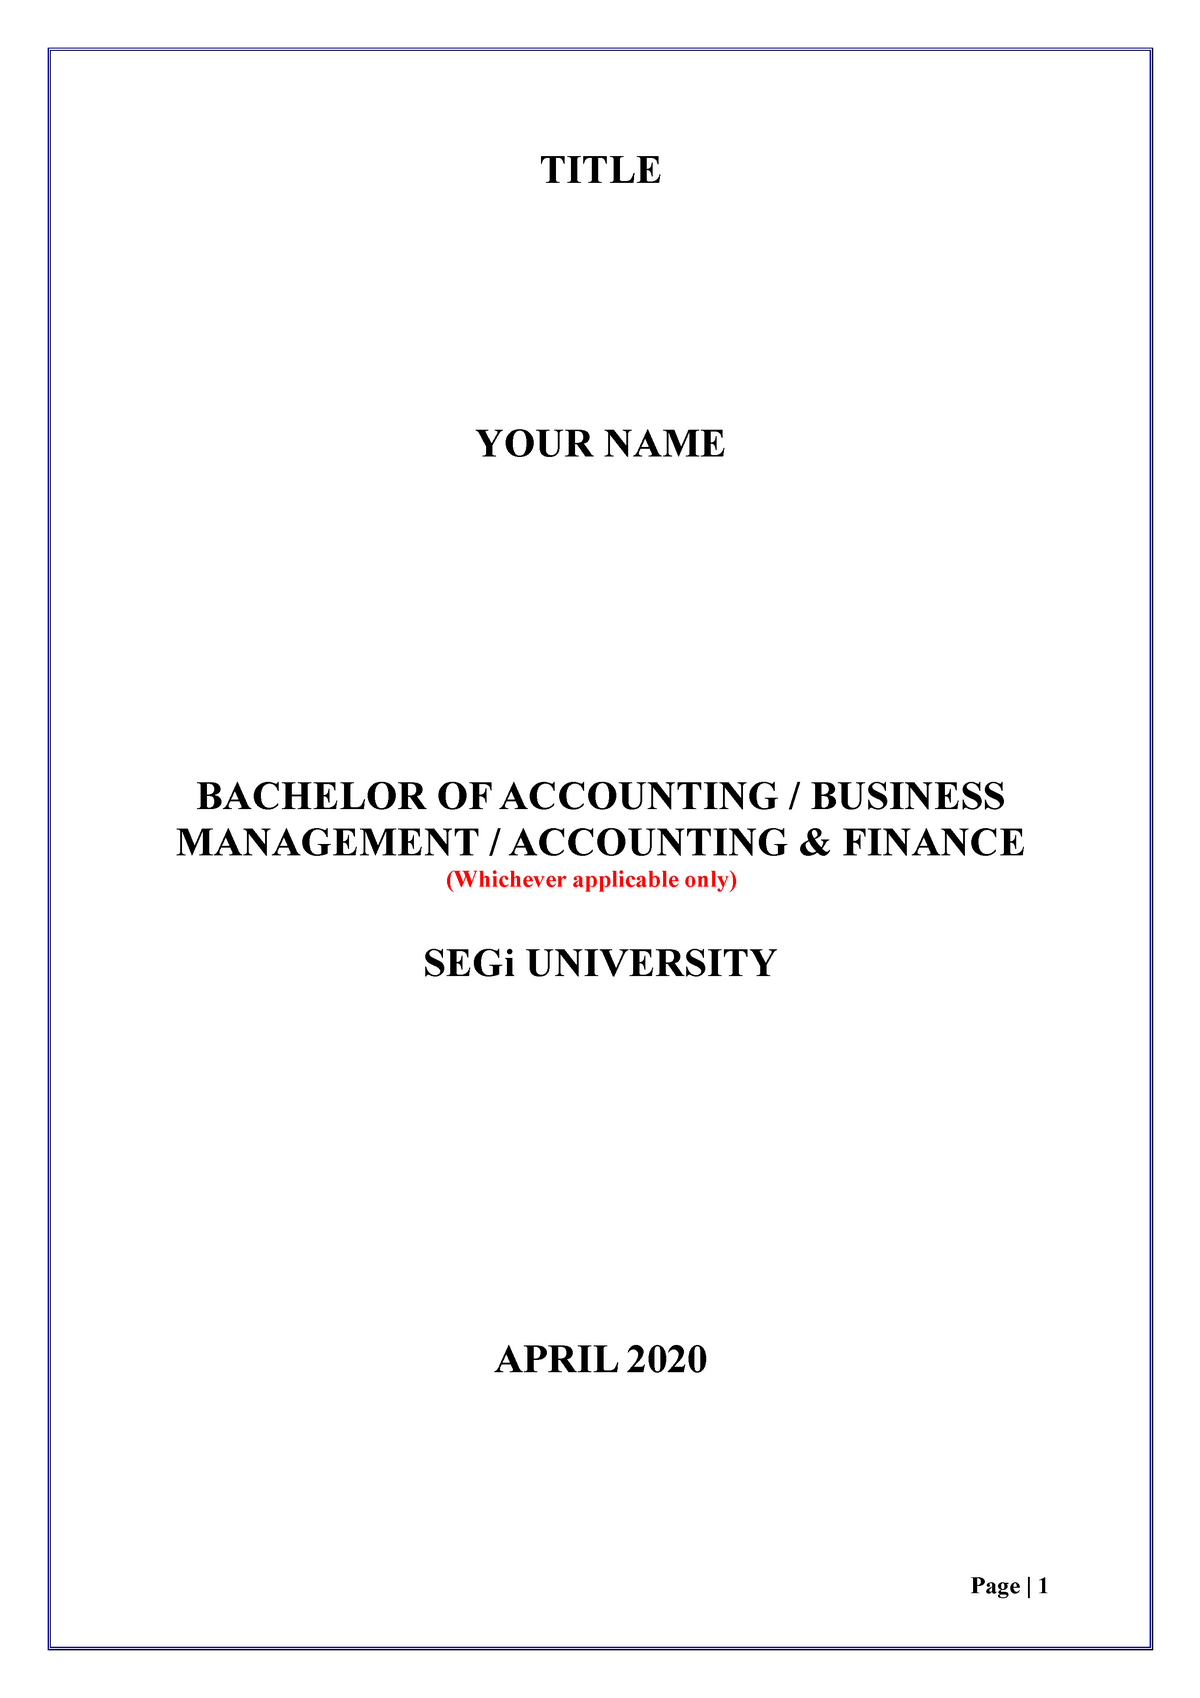 research title for accounting and finance department